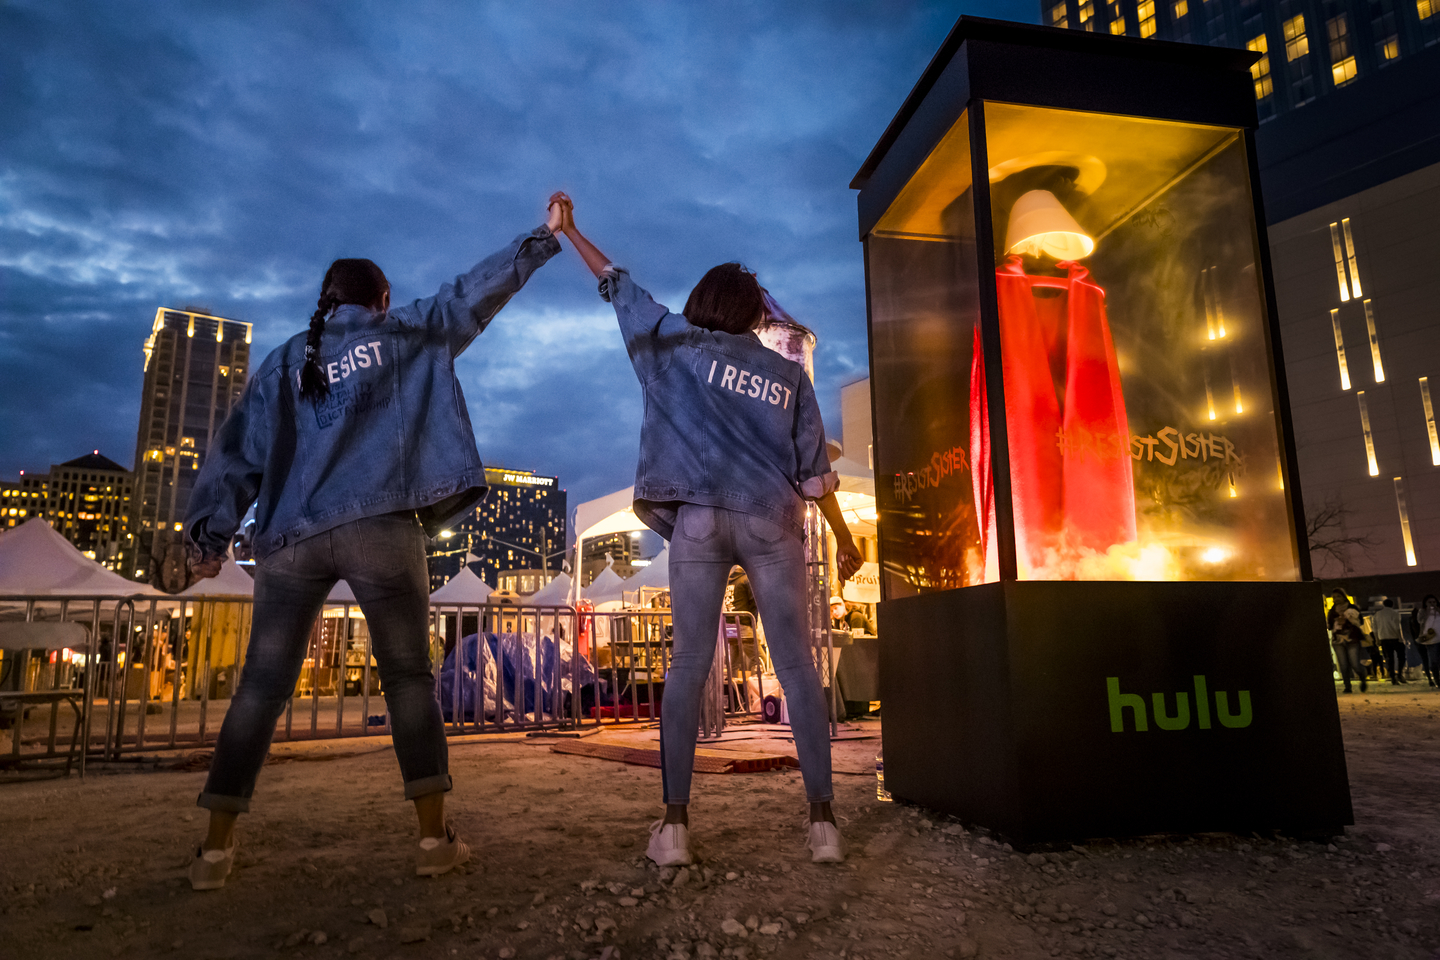 In advance of Season 2, Hulu burned red dresses from The Handmaid's Tale at seven different installations around Austin. Photo by Aaron Rogosin